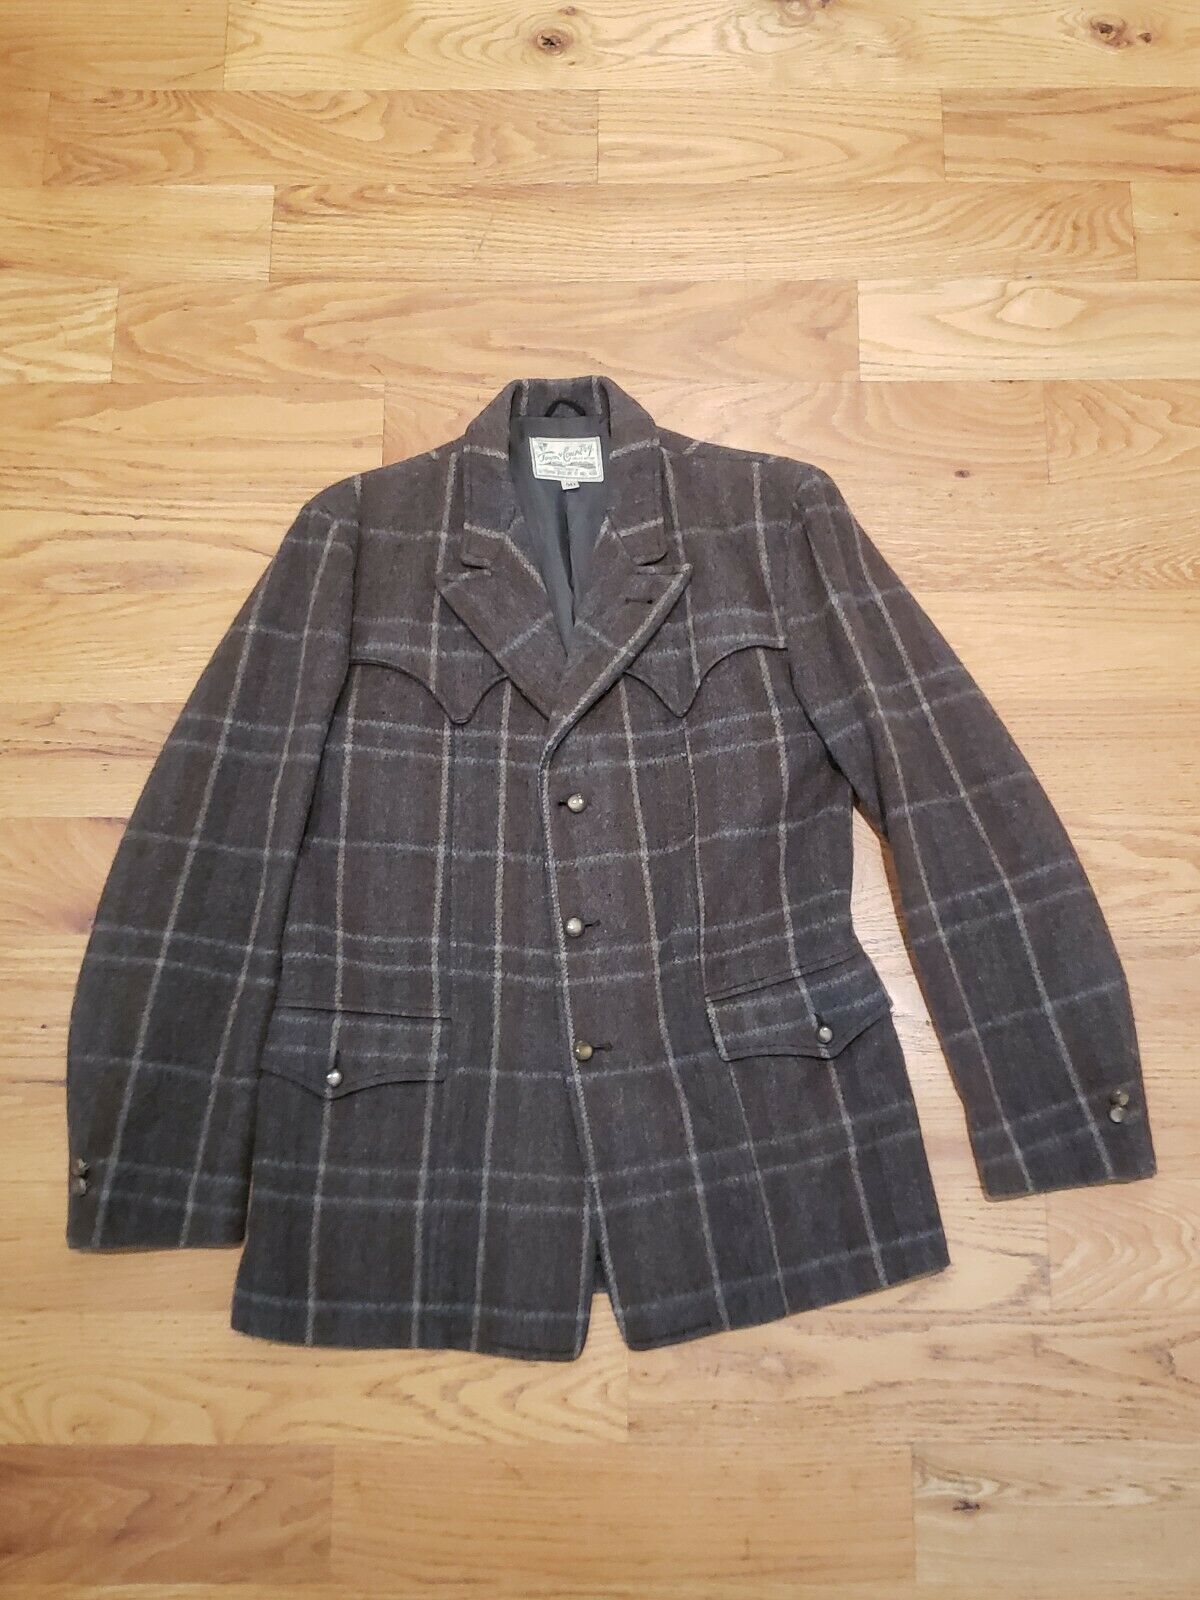 Vintage coat clearance - 1930s to 1950s via eBay with no reserves | The ...